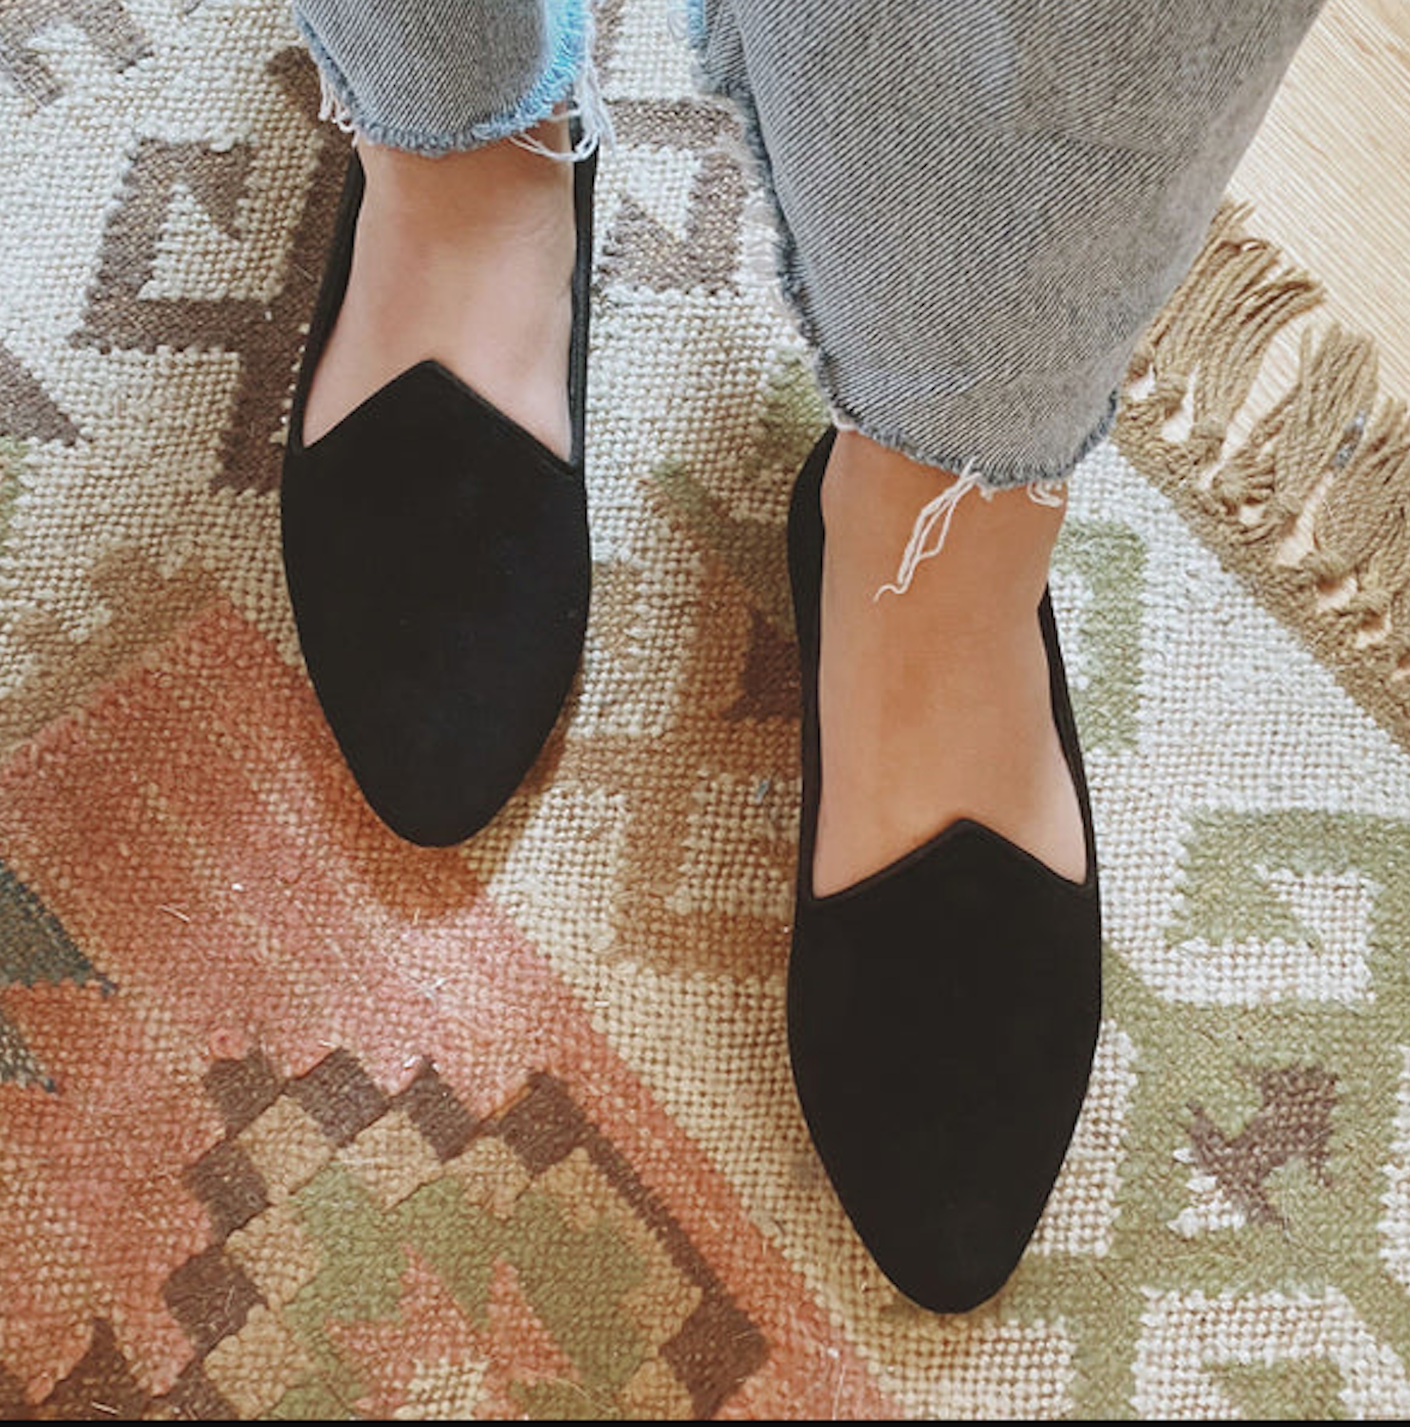 A person wears a pair of black, suede flats with a pair of light blue jeans while stepping on an orange patterned rugs.